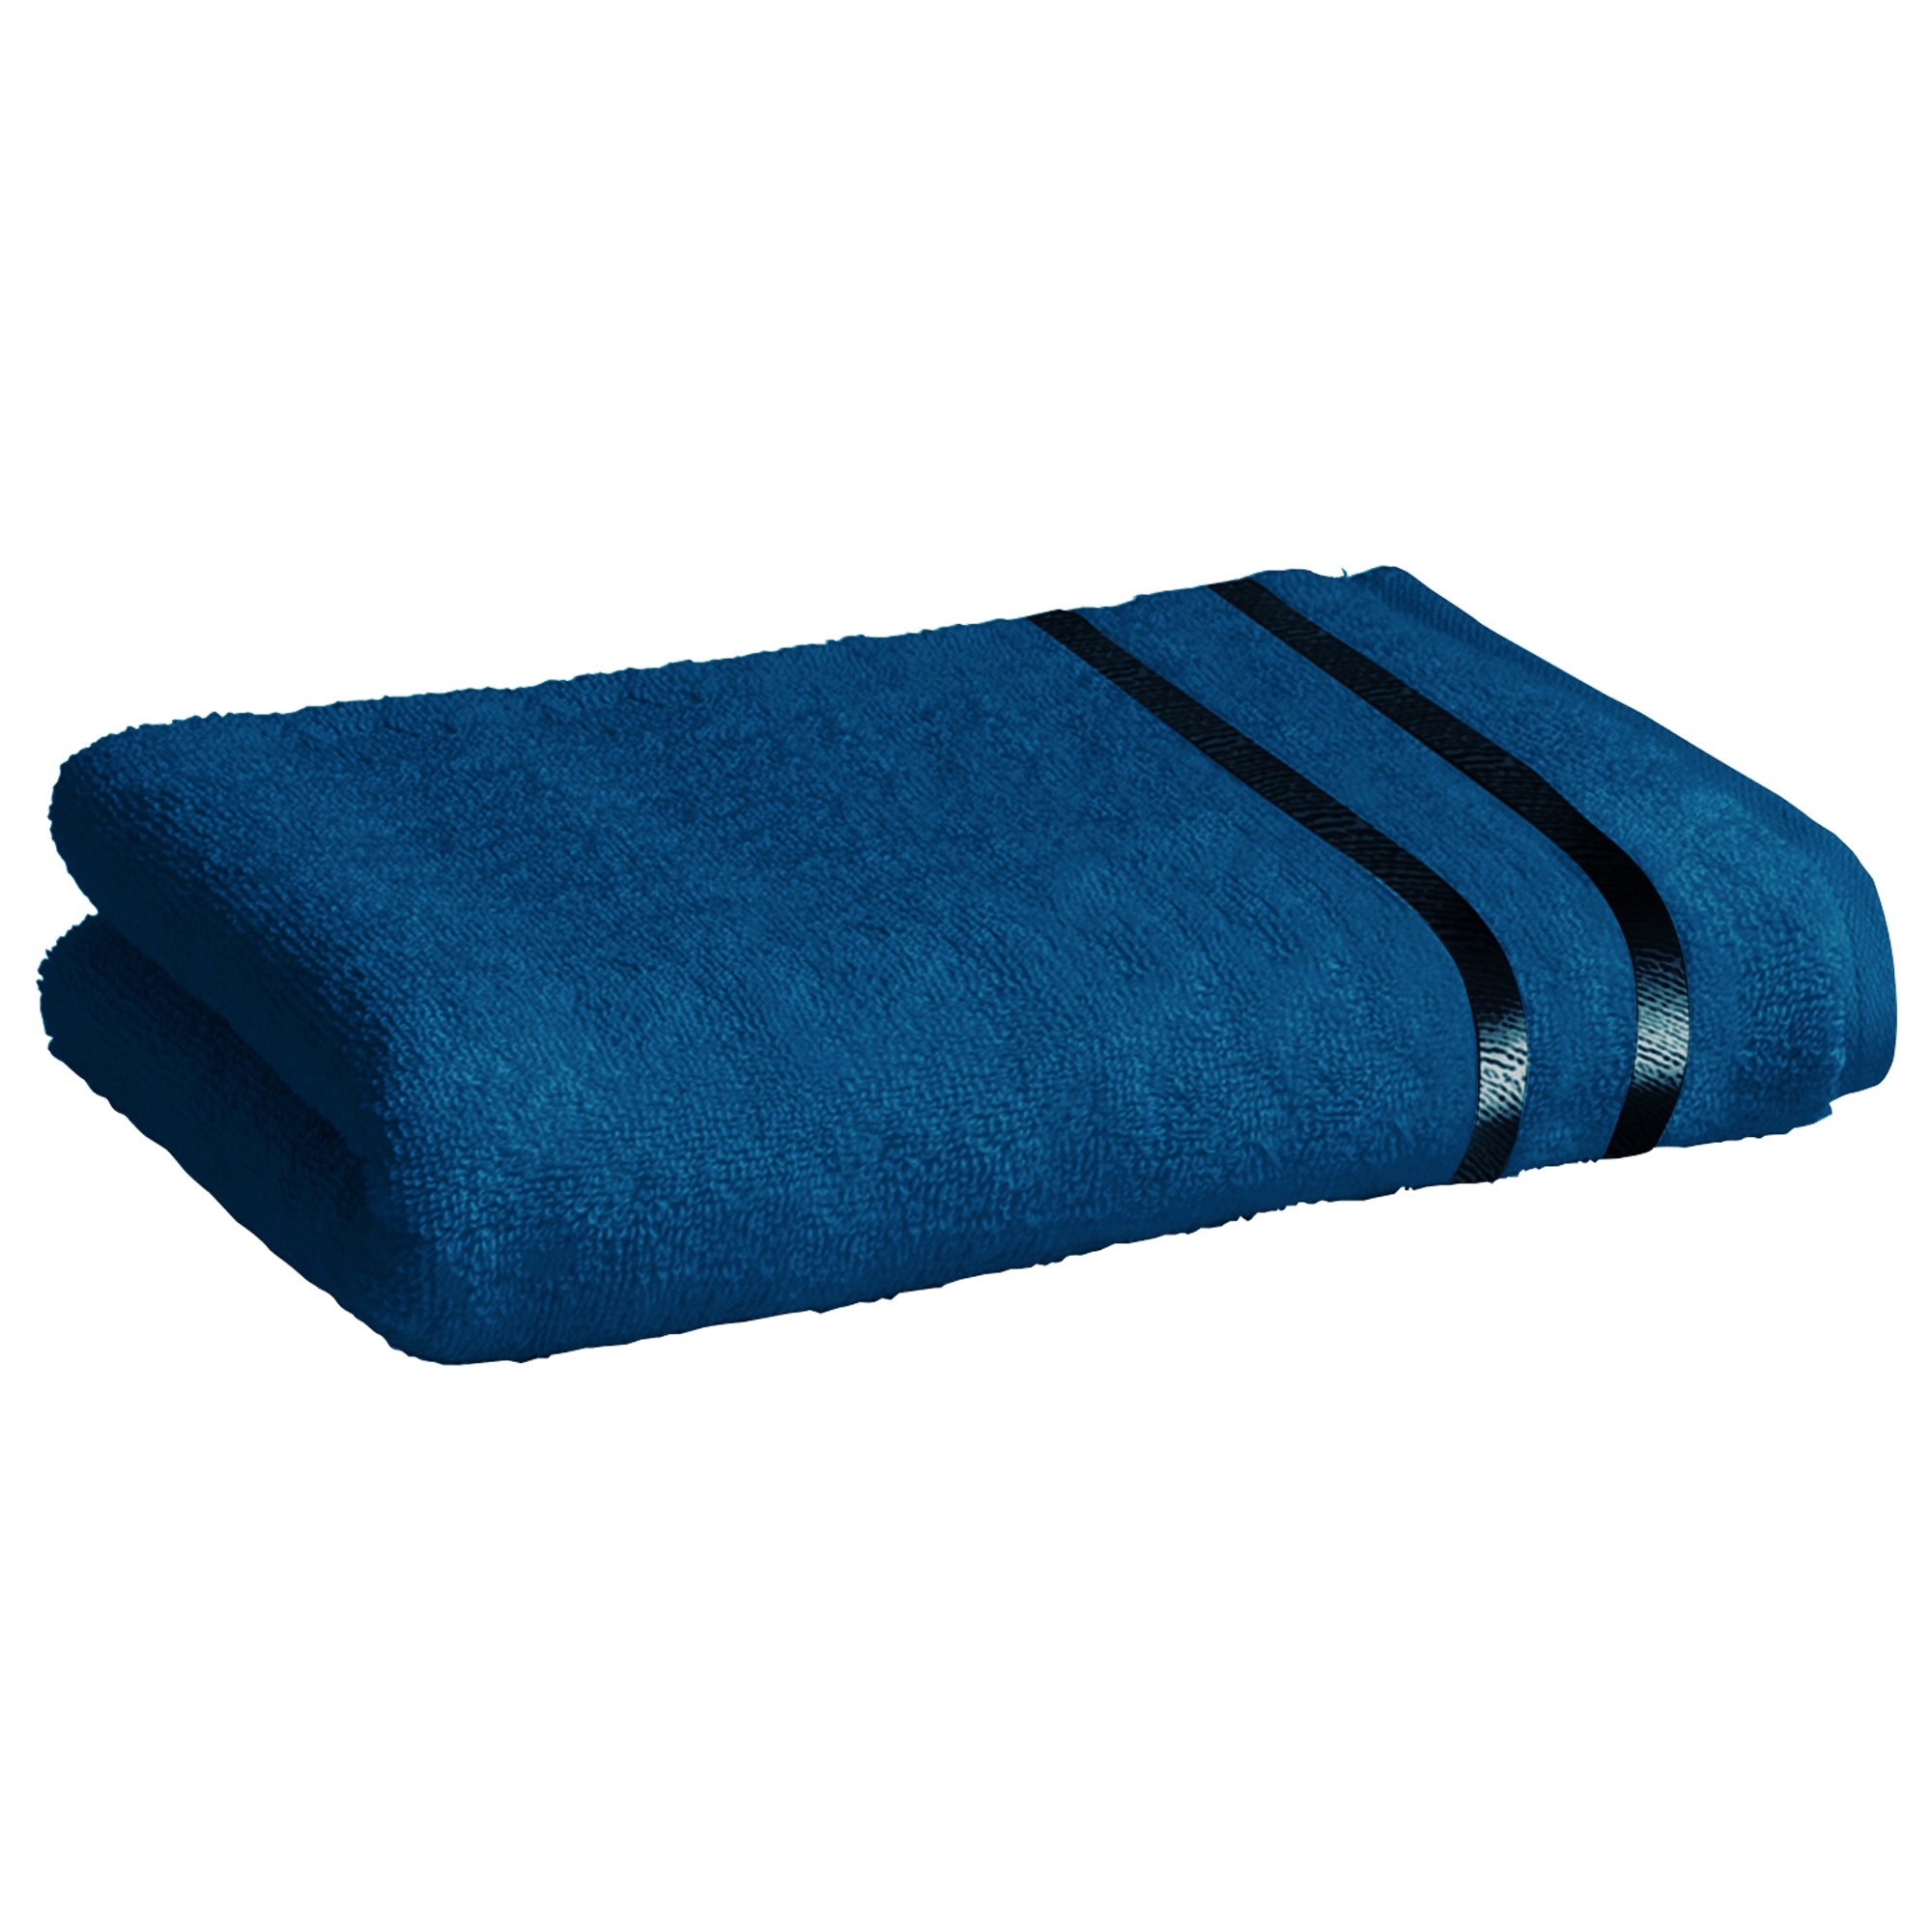 Story@Home 100% Cotton Bath Towels - Navy